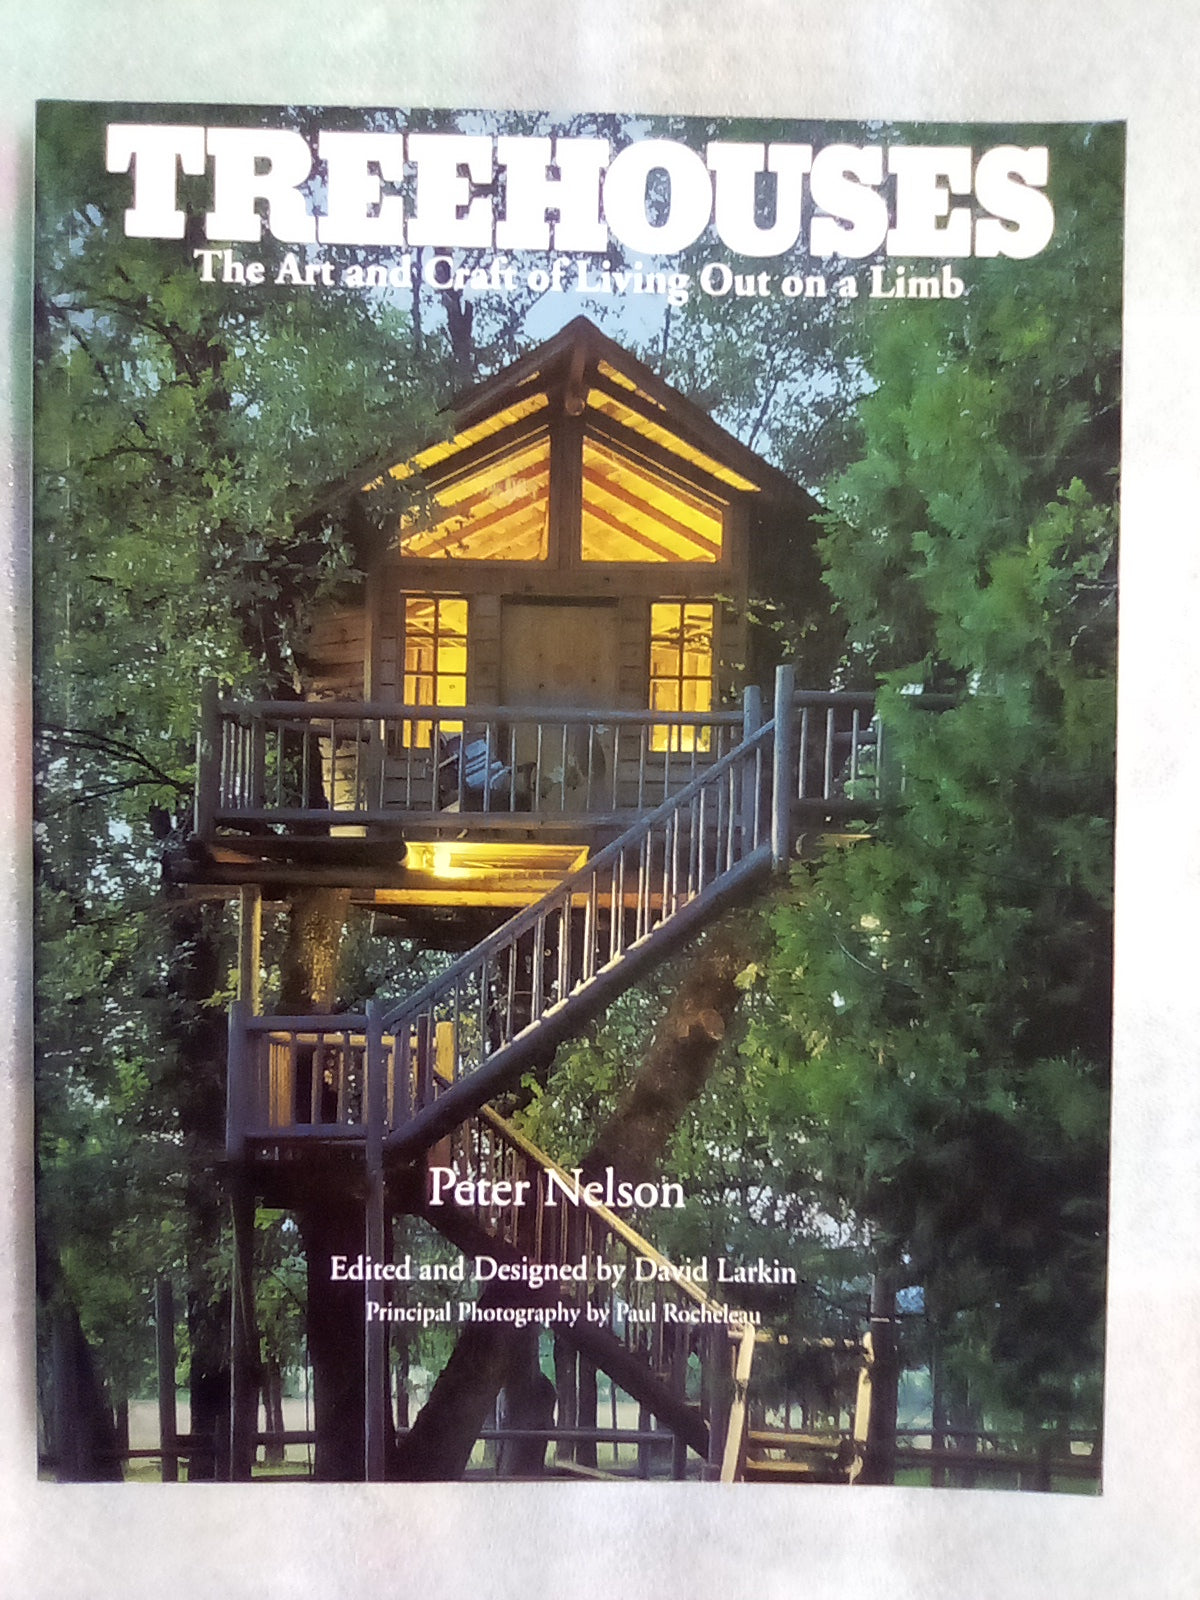 Treehouses - The Art & Craft of Living Out on a Limb